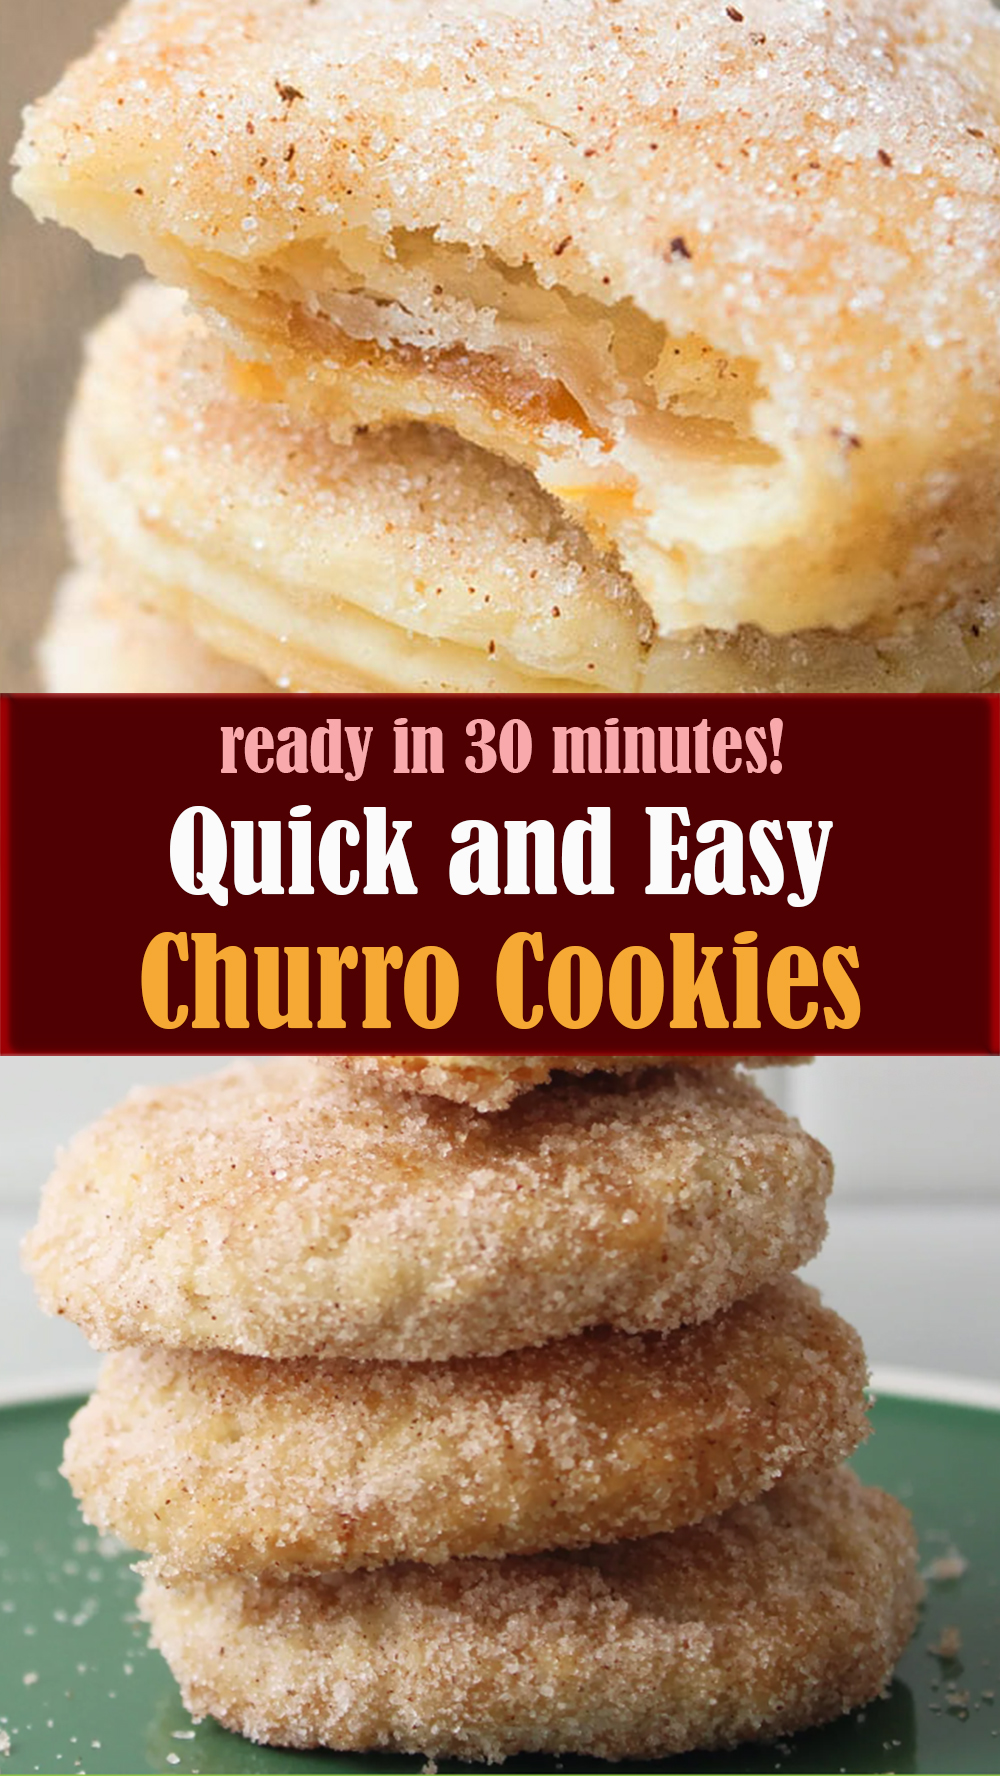 Quick and Easy Churro Cookies